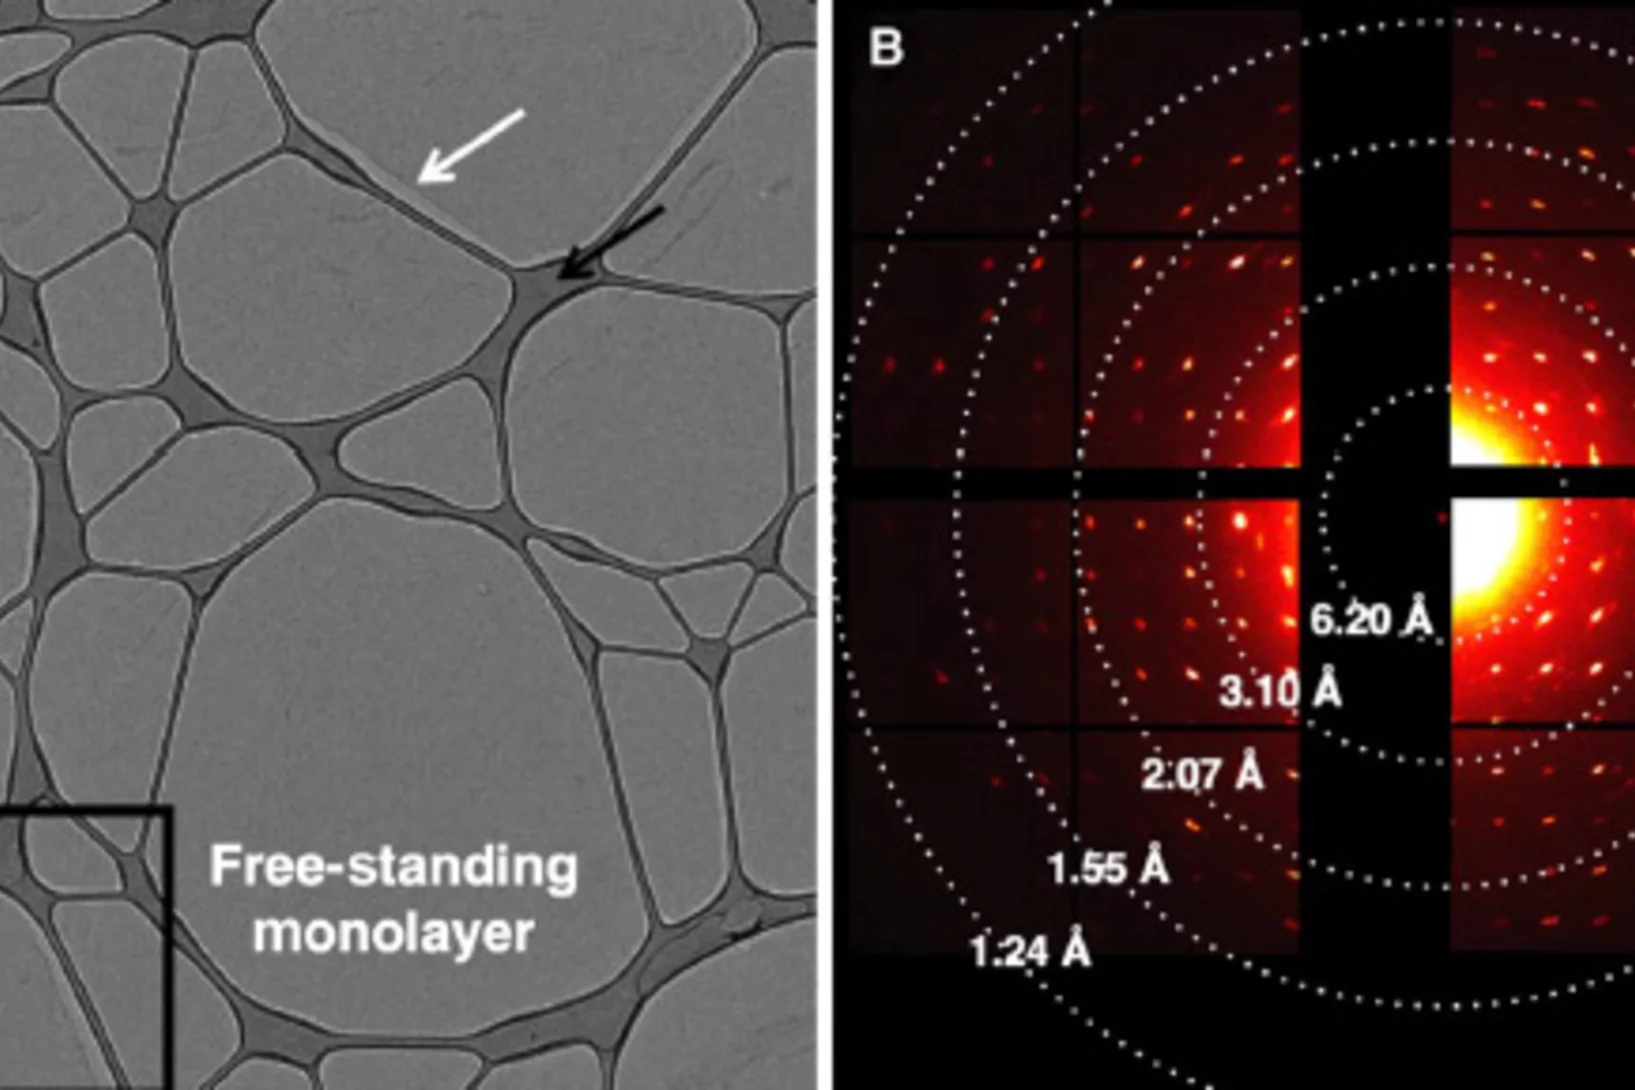 Cryo-TEM investigation of a free-standing monolayer of a calixarene derivative. The TEM-Picture on the left shows the monolayer deposited on a lacey carbon support. The electron diffraction pattern on the left confirms the formation of a crystalline monolayer